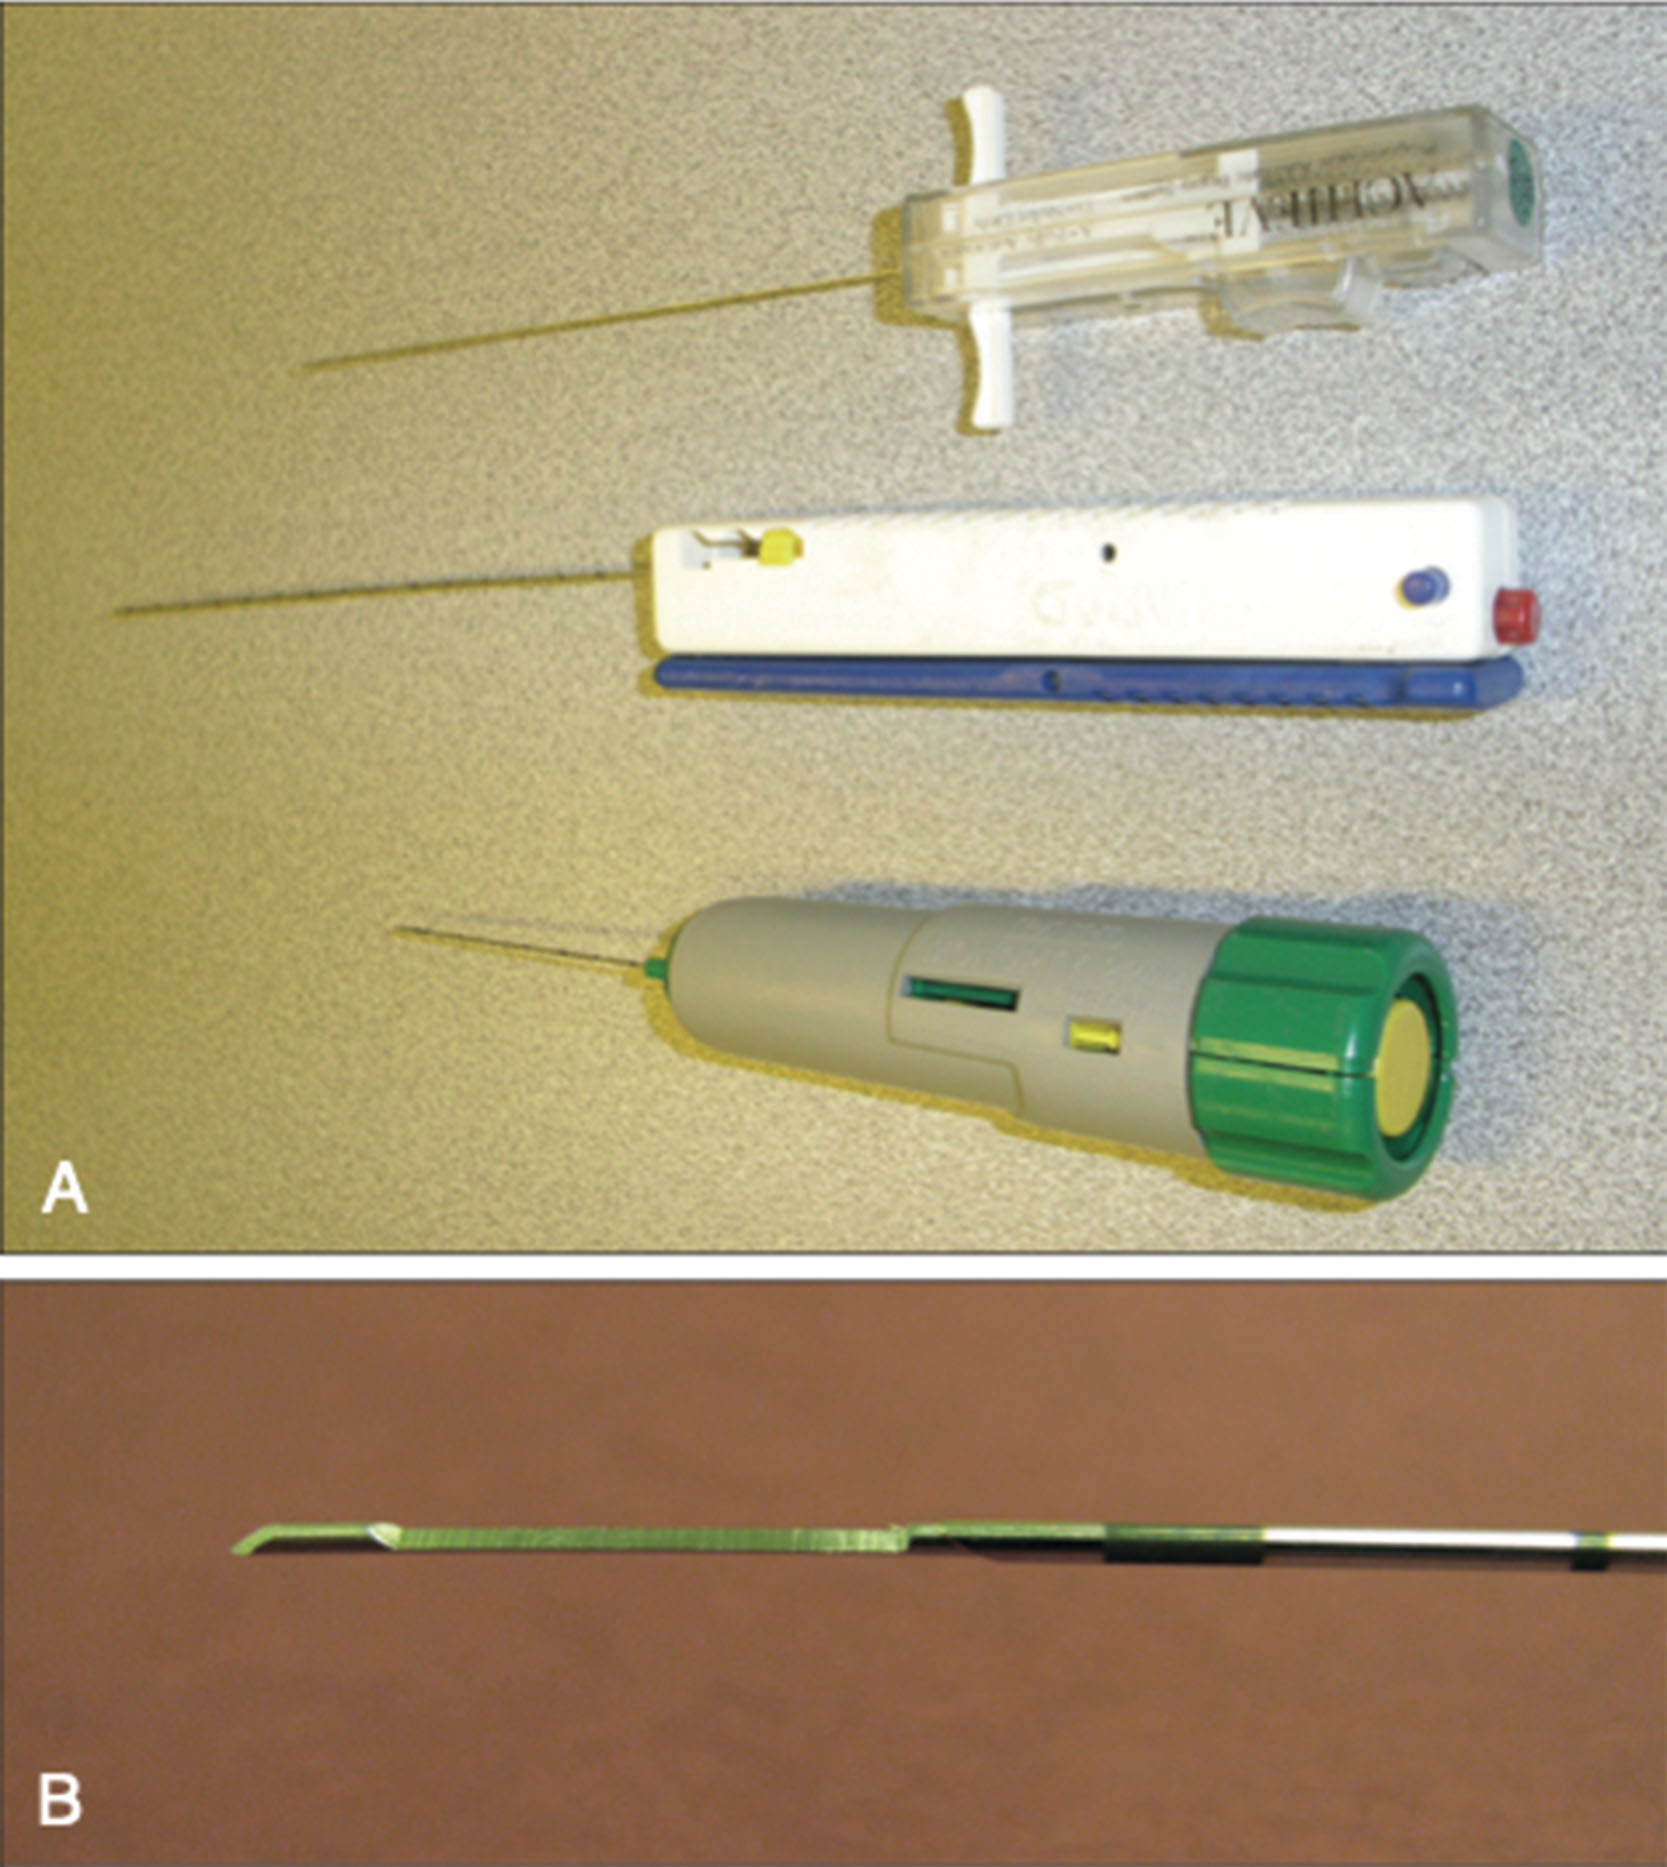 Fig. 18.9, (A) Biopsy devices used for core biopsies. (B) Close-up of a core needle where the specimen is deposited.